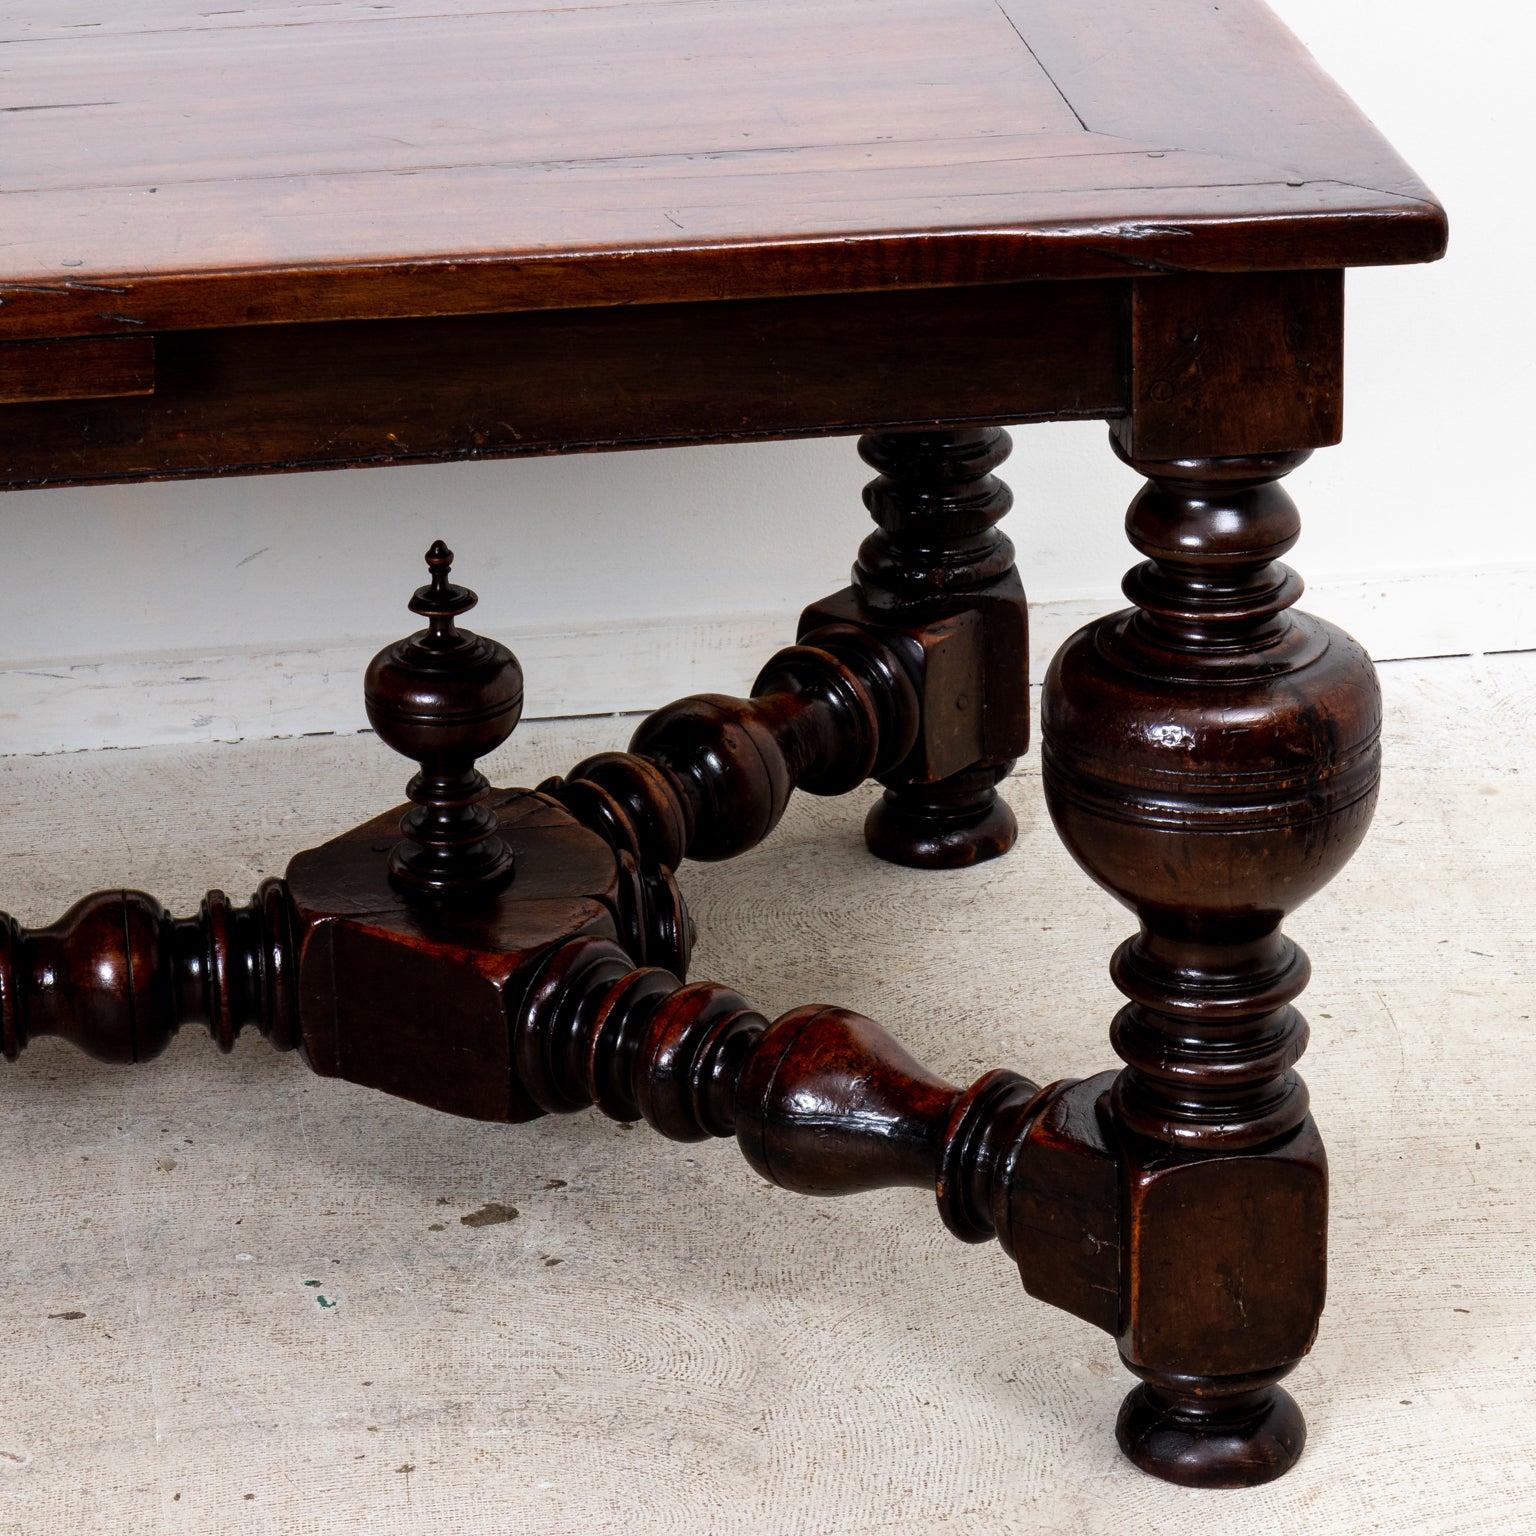 This late 18th century French walnut table exhibits a time warn patina, with dramatic bulbous turned legs and stretcher bar featuring turned finials and bun feet. Two sets of extension leaves included. Measures: 24.5